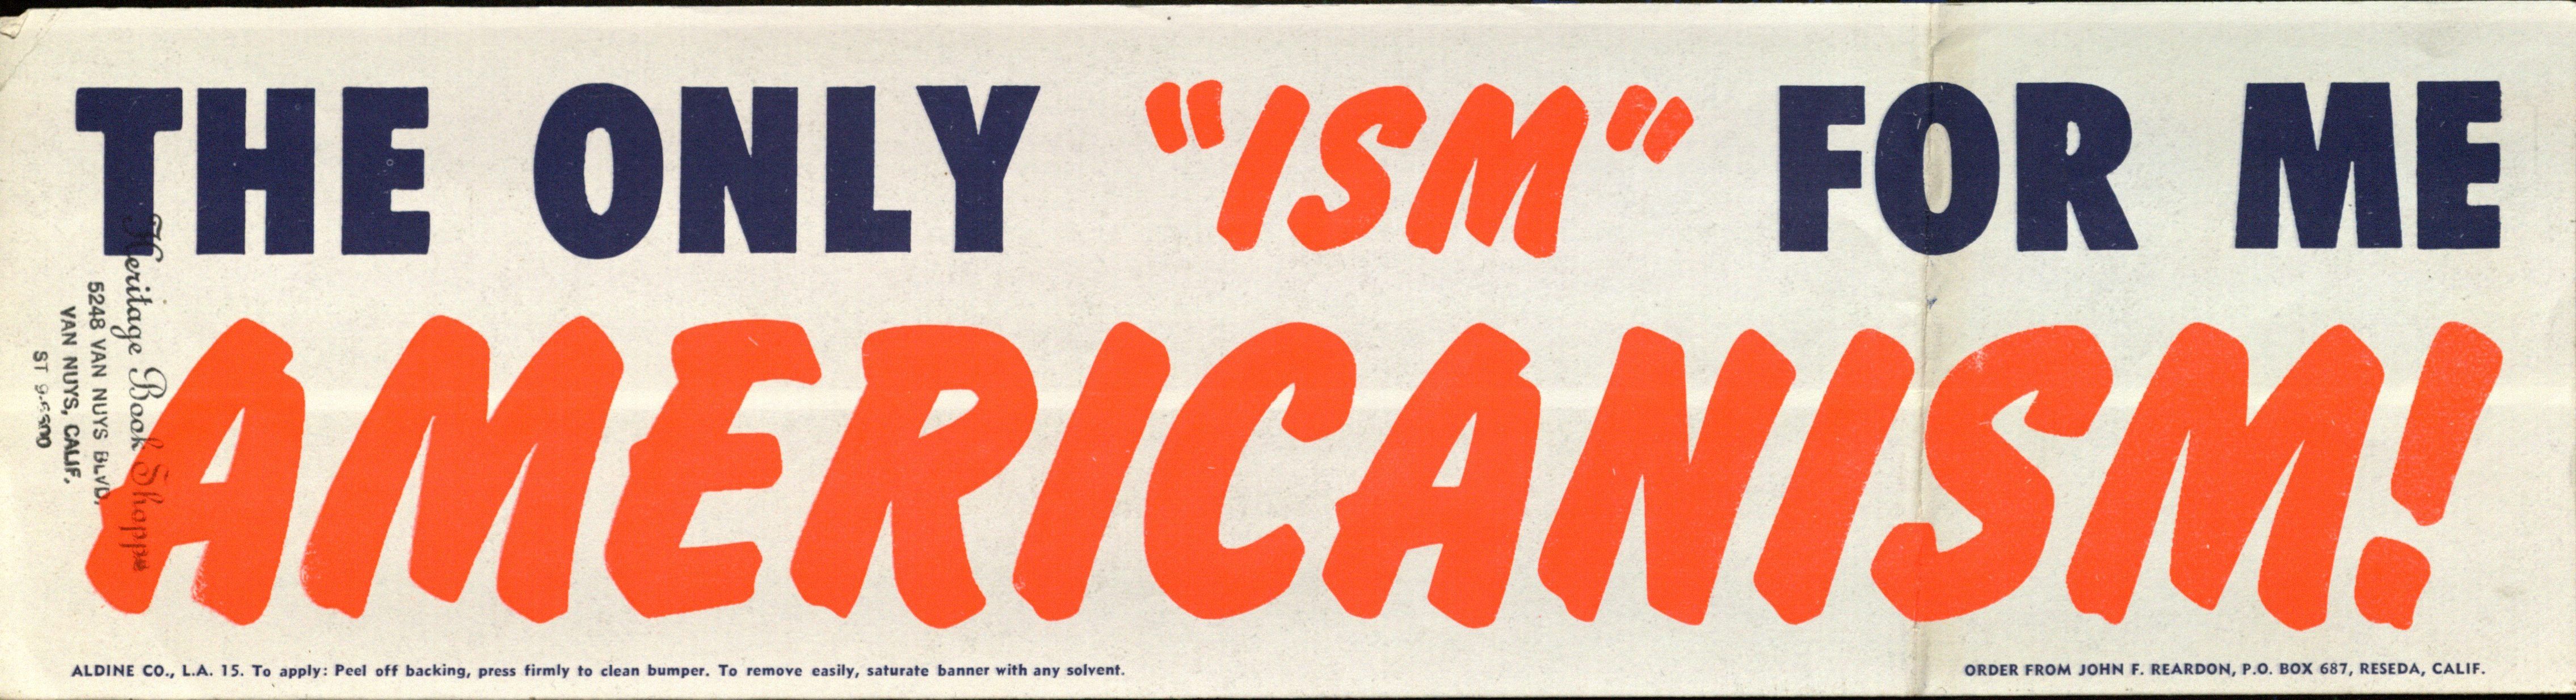 Bumper Sticker: The only "ism" for me is Americanism